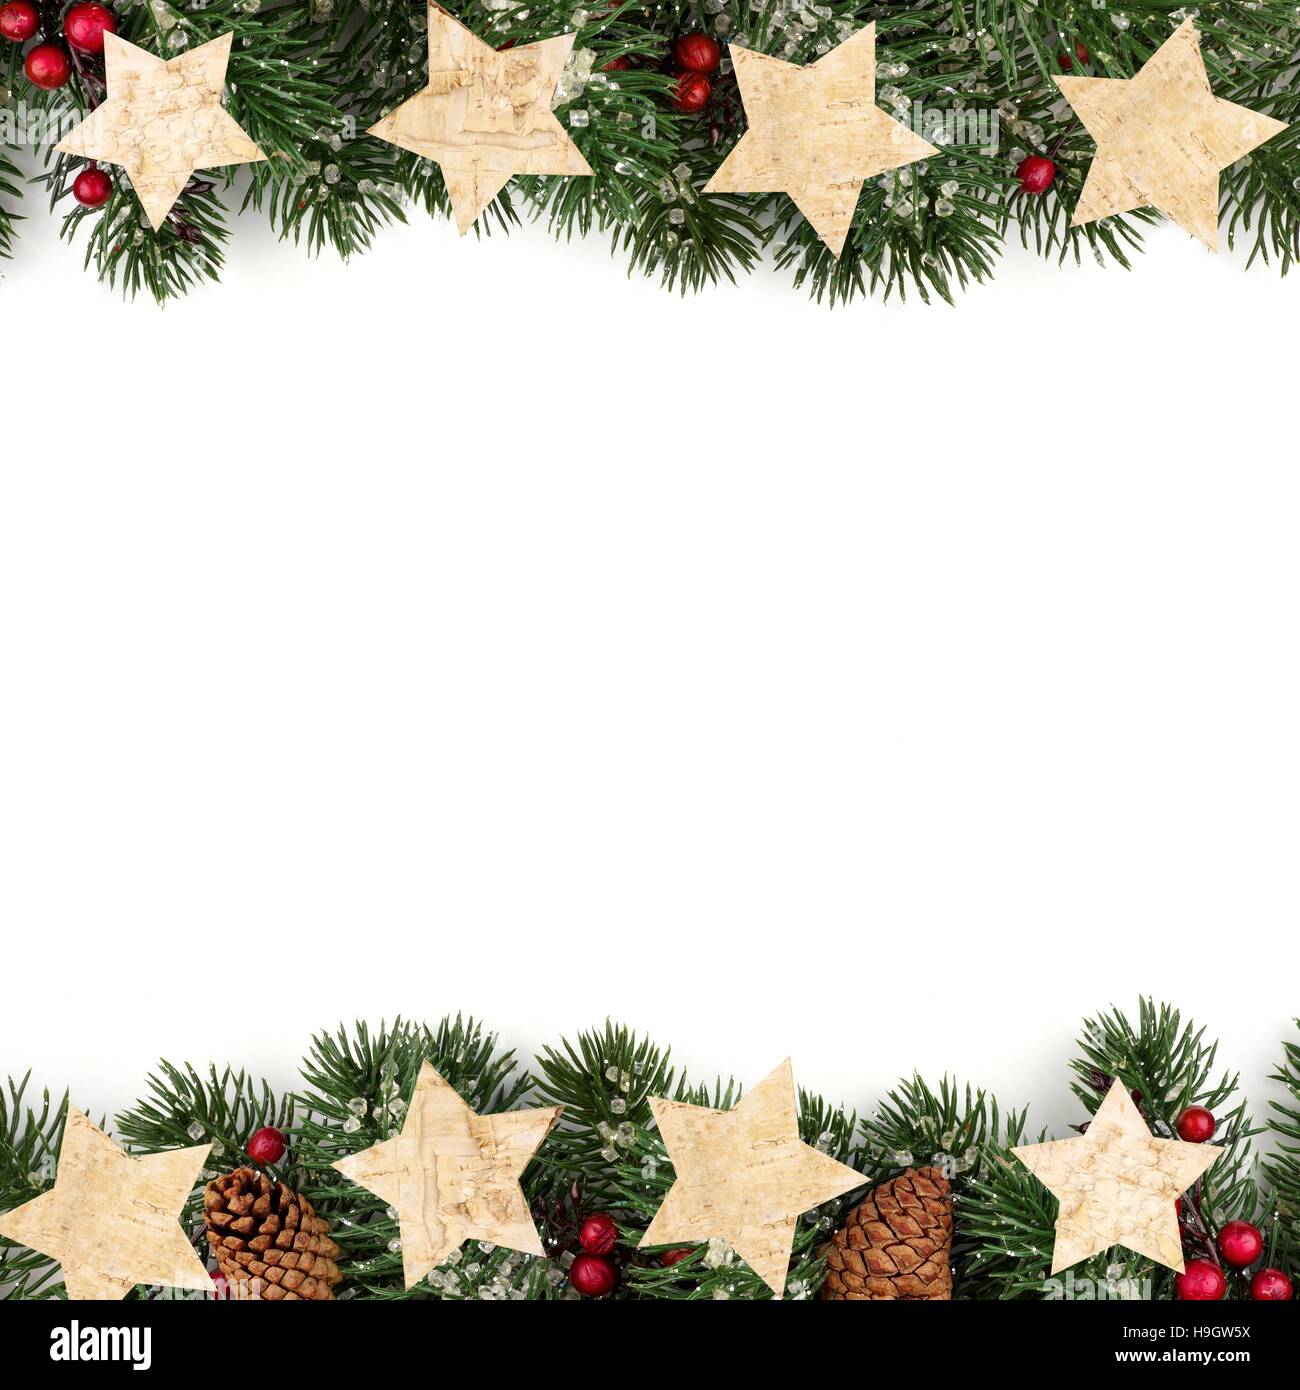 Christmas double border of branches with rustic wood star ornaments ...